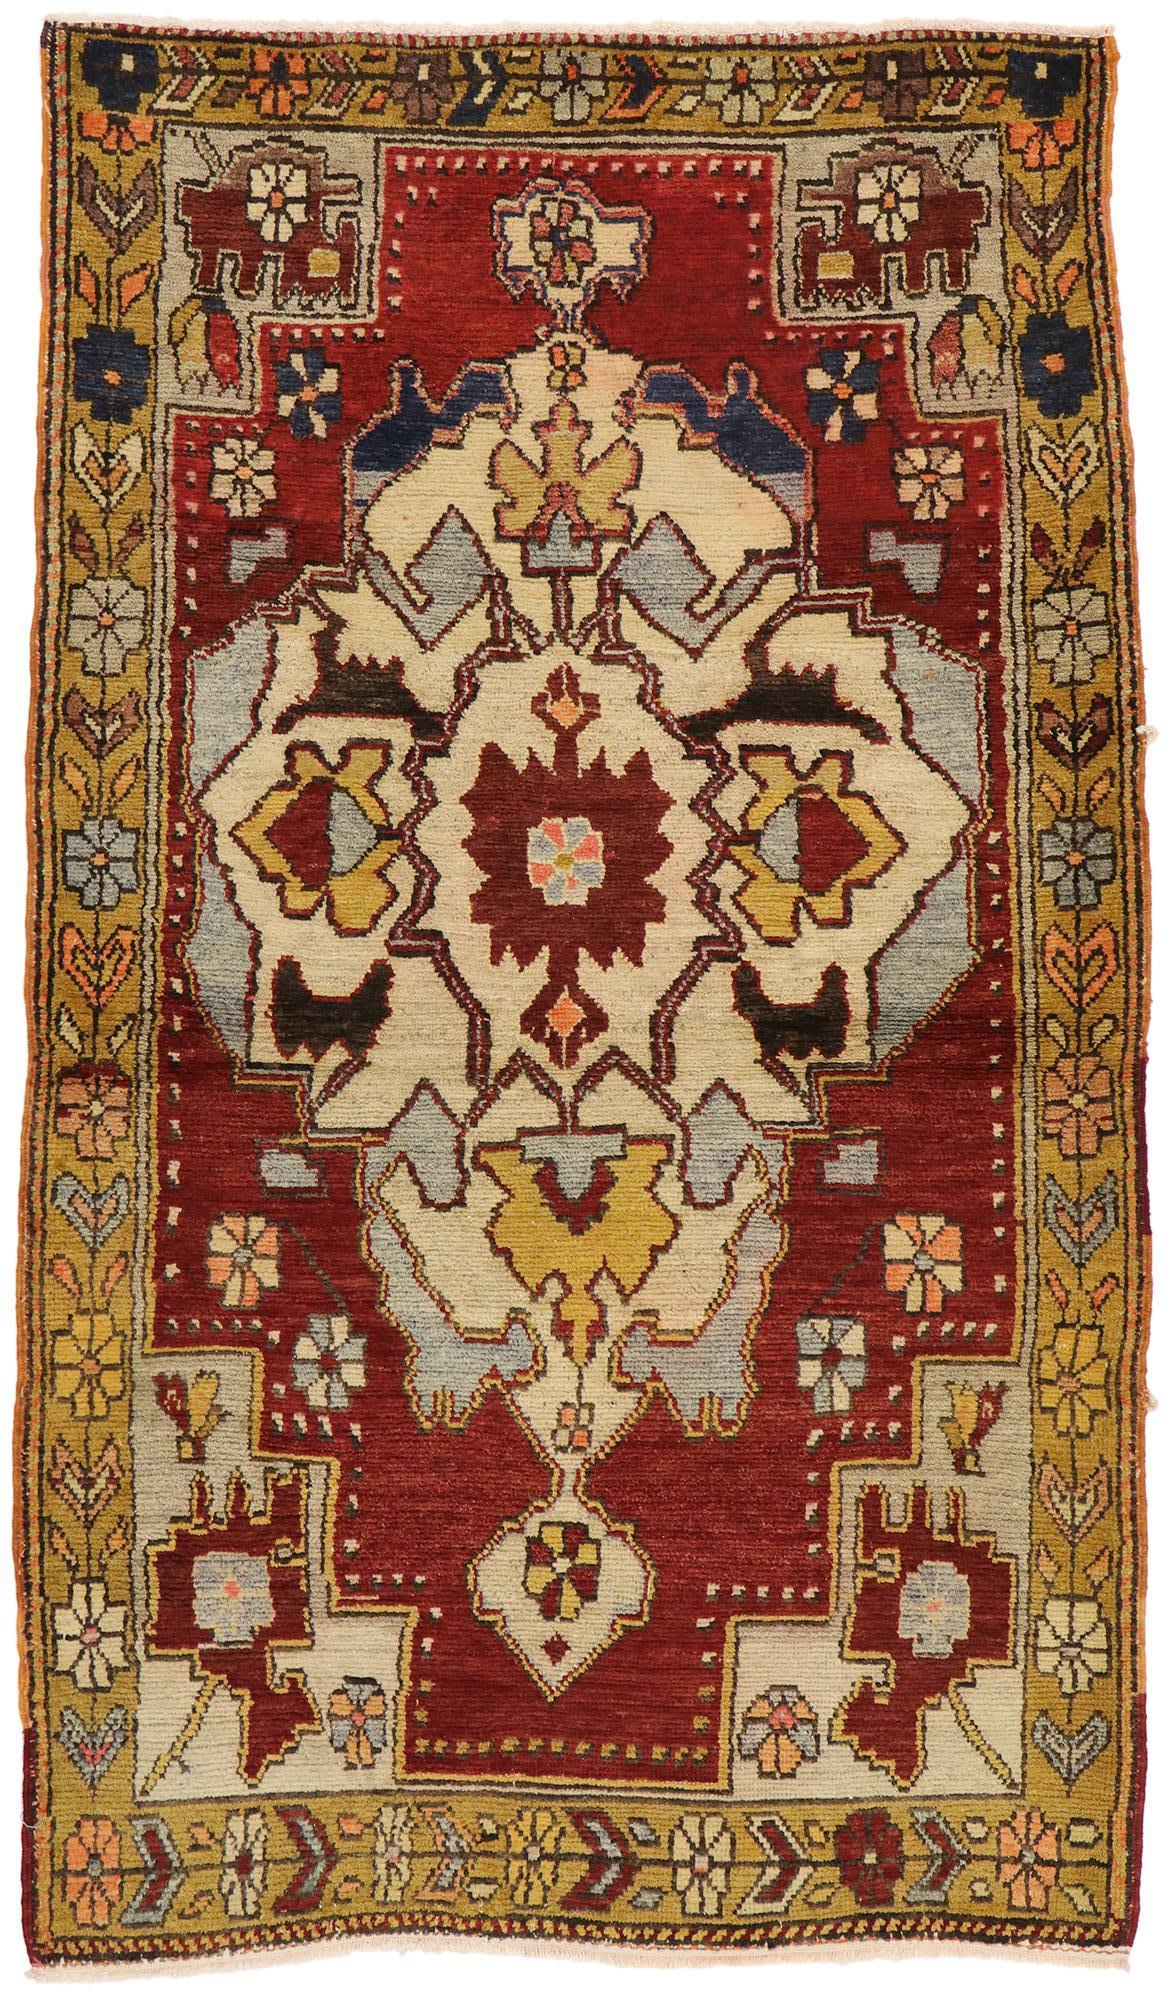 50241 Vintage Turkish Oushak Accent Rug with English Tudor Manor House Style 03'07 x 06'01. Balancing English charm and timeless design with refined colors, this hand-knotted wool vintage Turkish Oushak rug is poised to impress. The abrashed dark